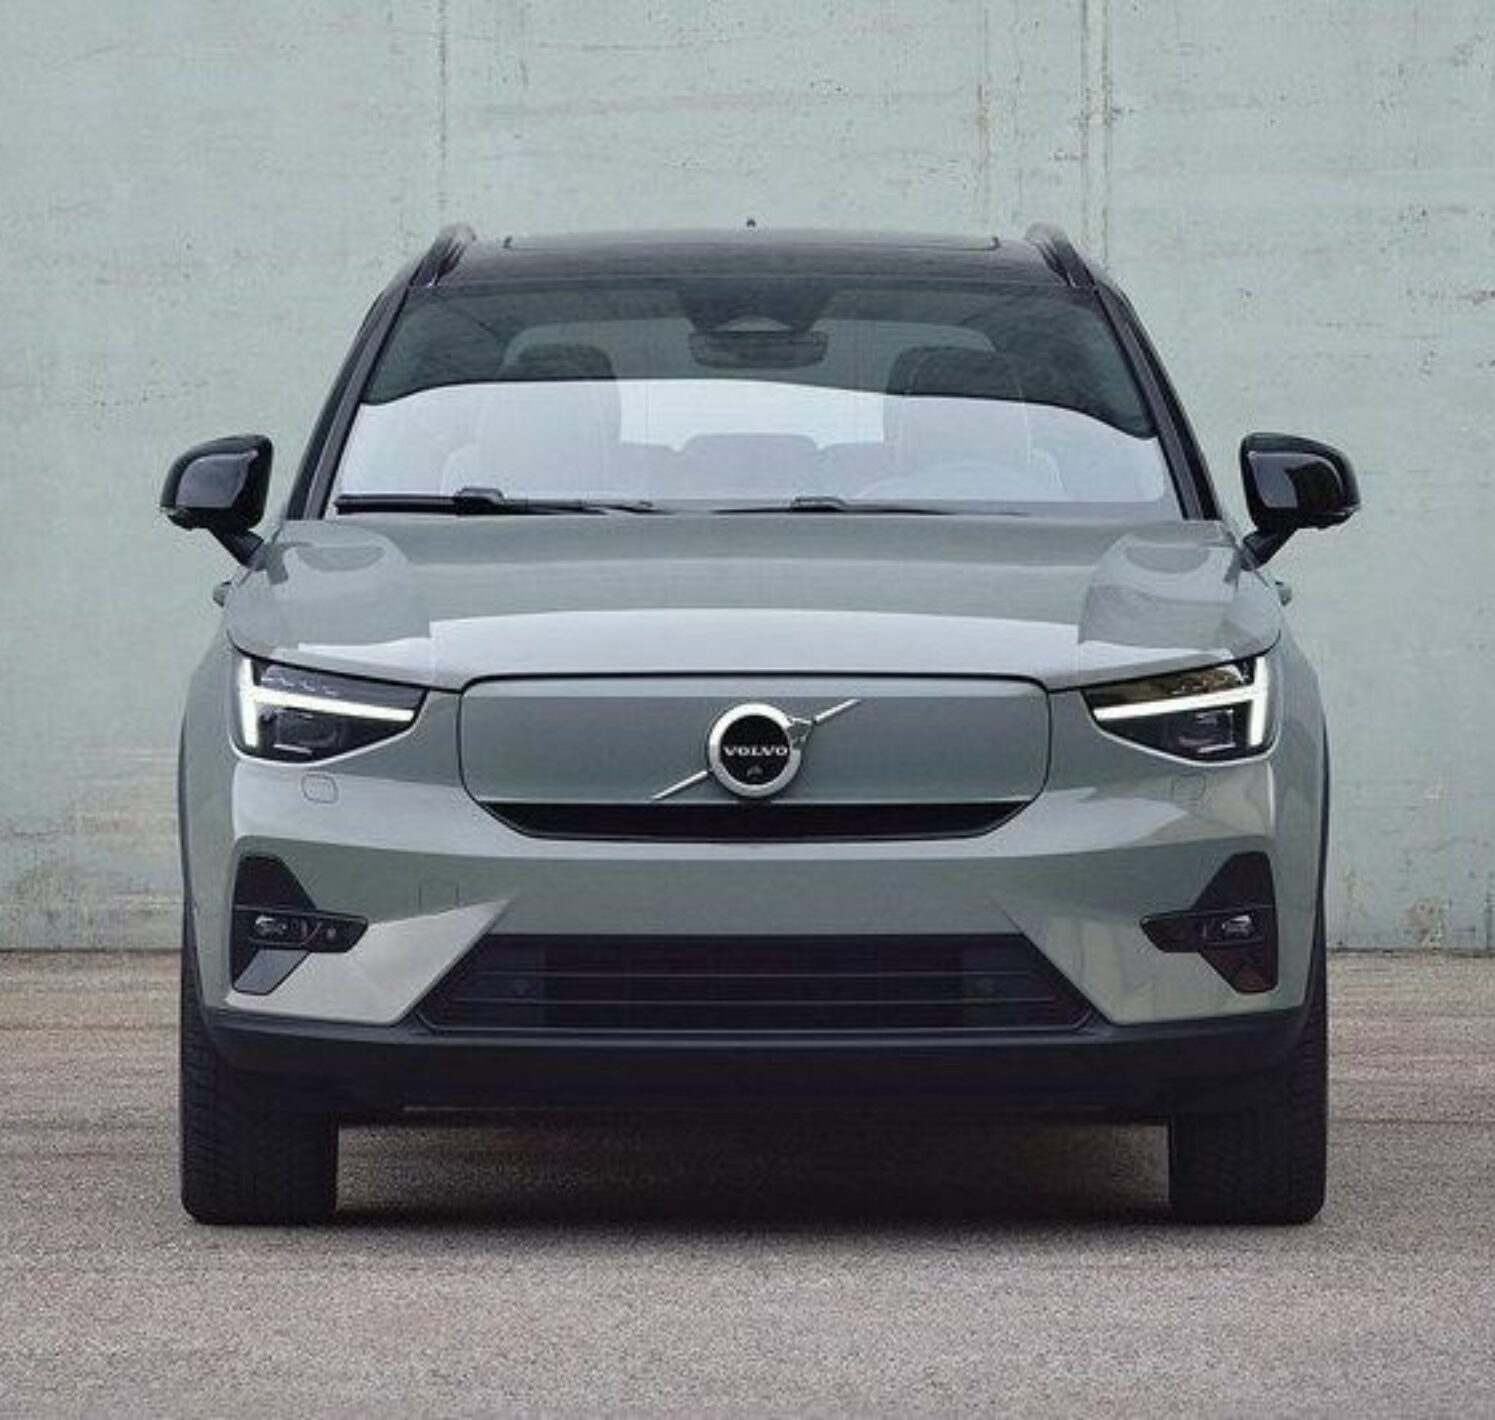 https://autofilter.sk/assets/images/xc40-recharge/gallery/volvo-xc40-recharge-2022_14-galeria-1.jpg - obrazok